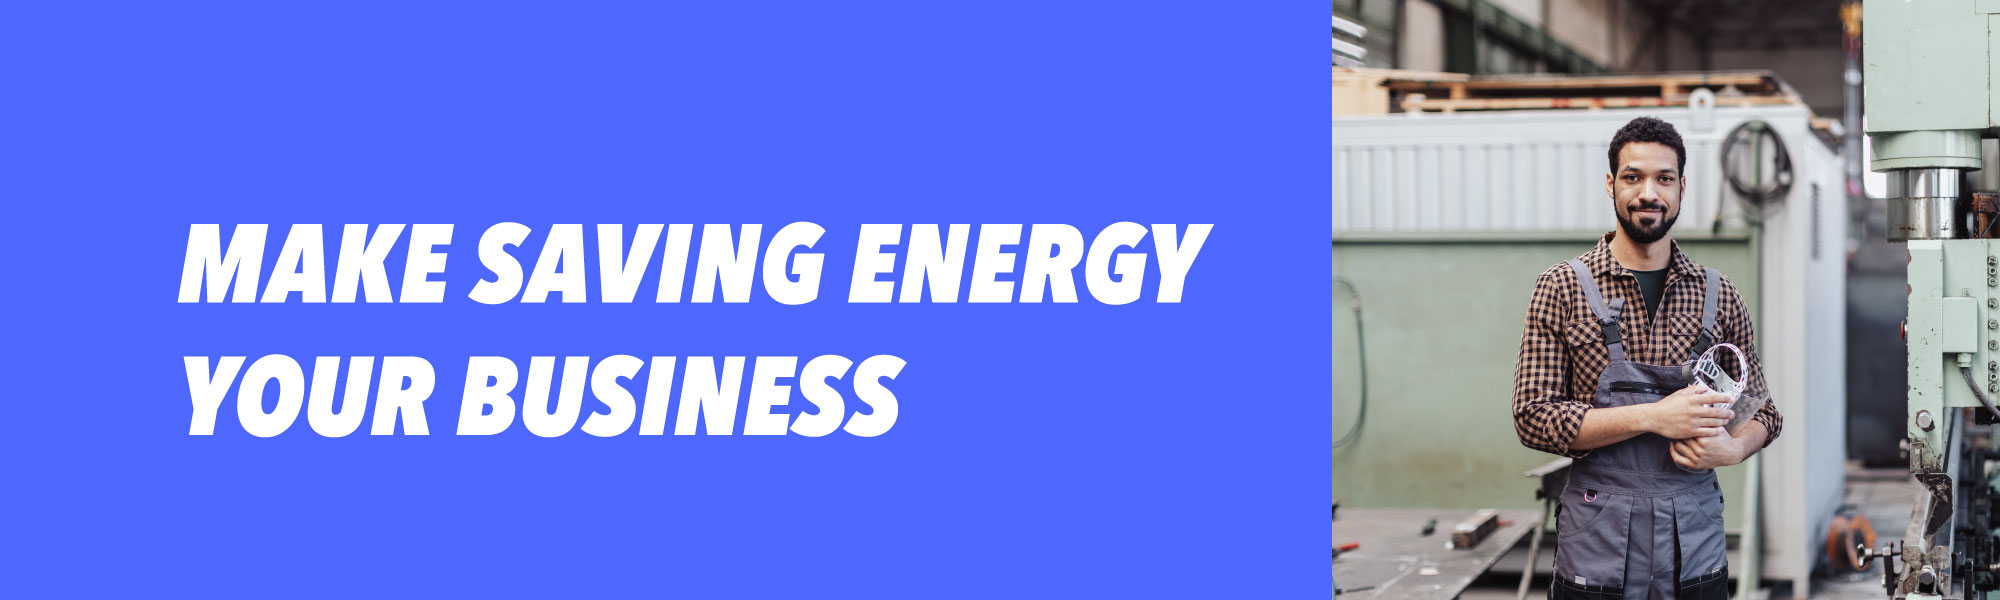 Text saying Make Saving Energy Your Business next to a business person in a workshop